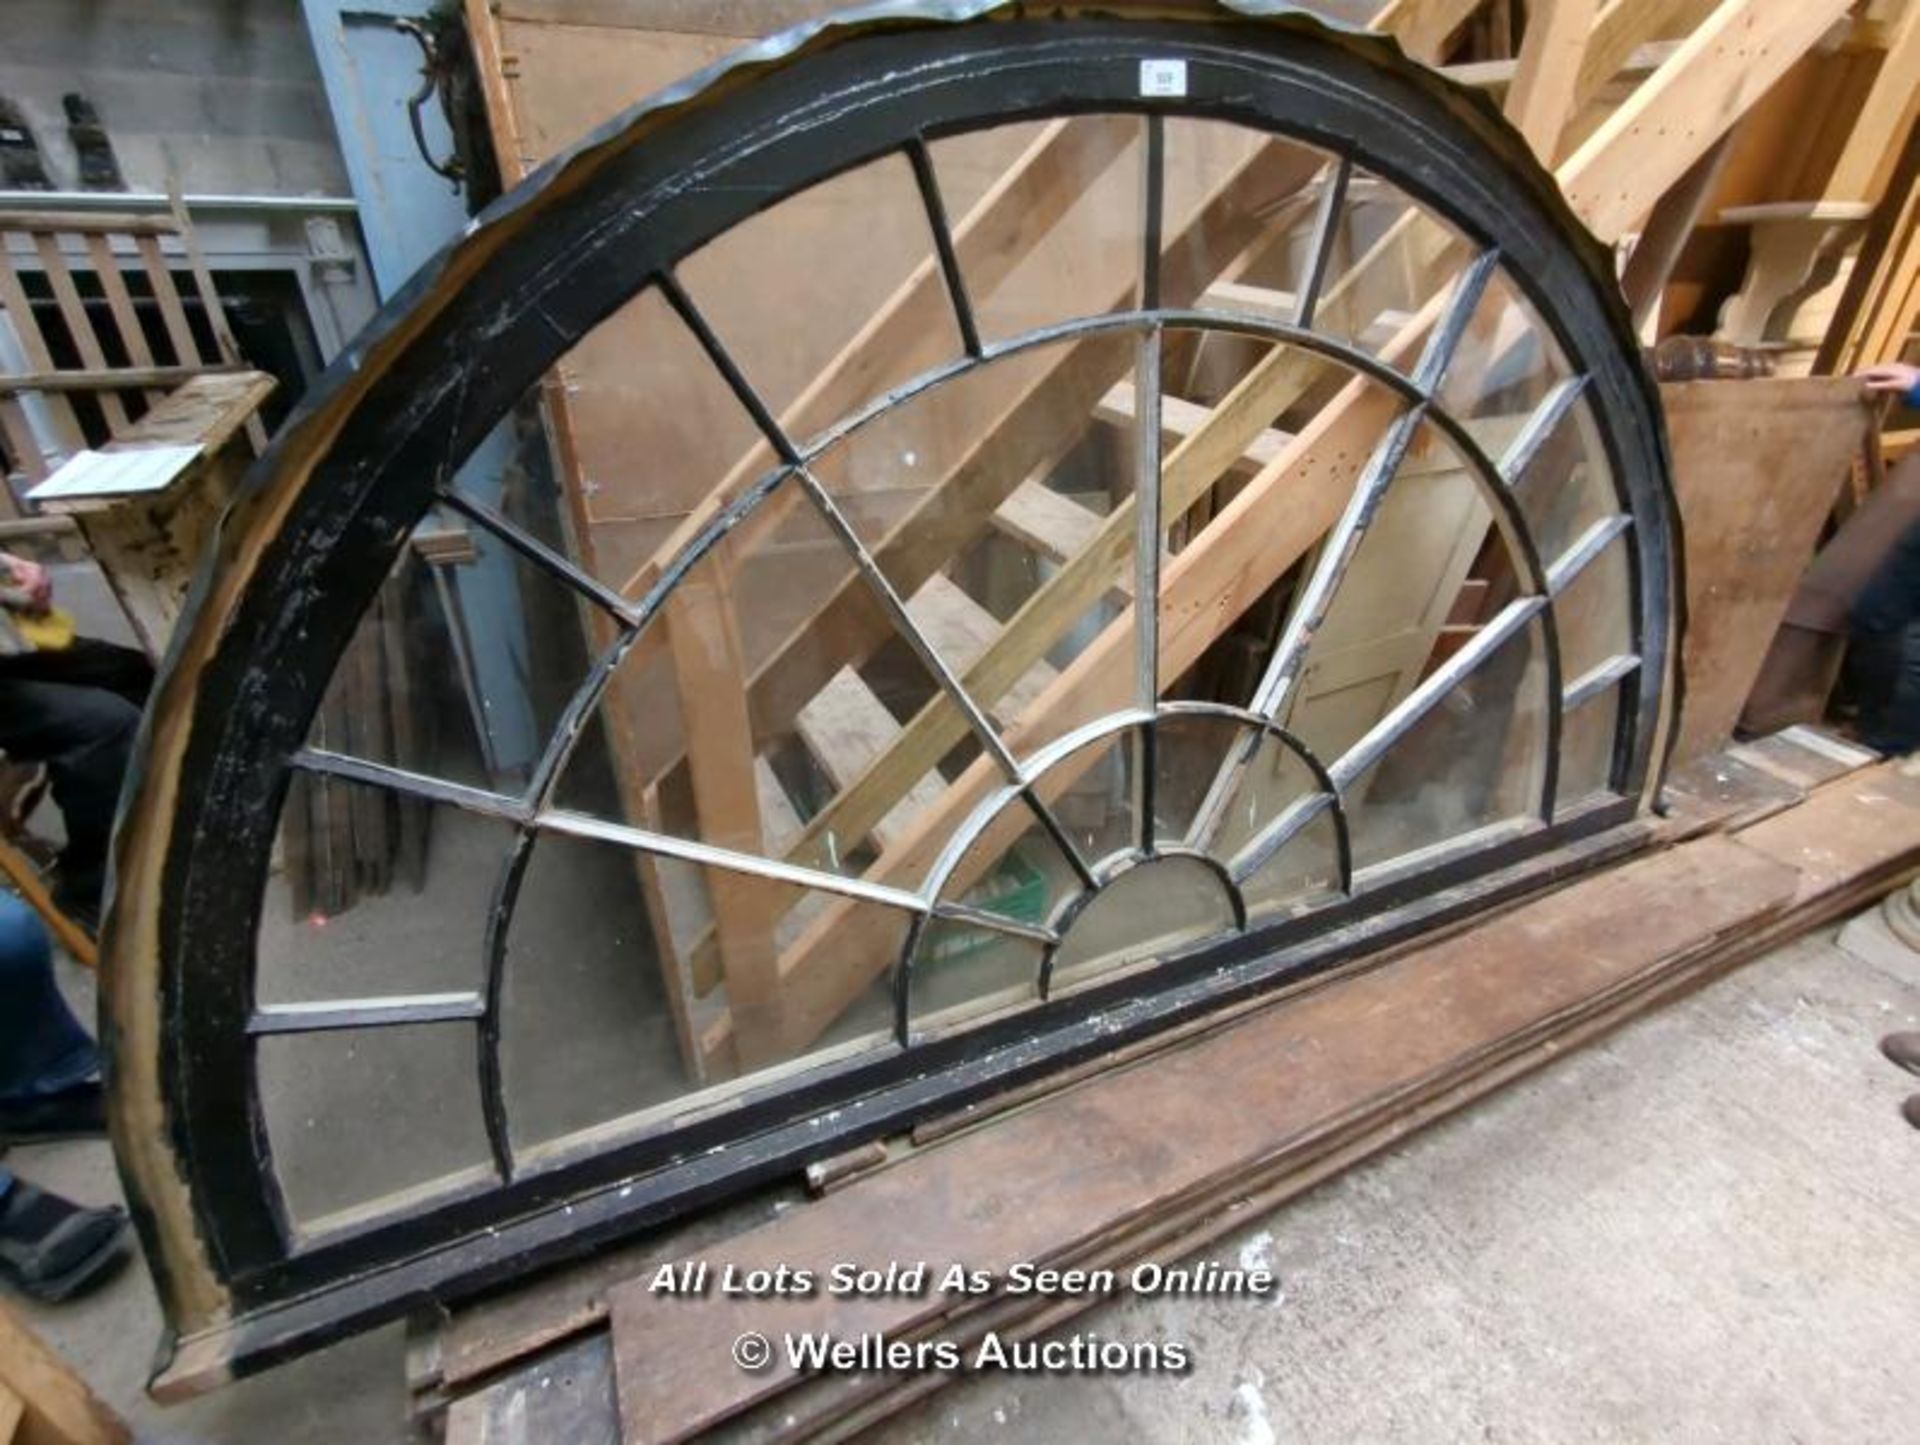 MASSIVE VICTORIAN FANLIGHT - MISSING TWO PANELS OF GLASS - 57.5" H X 109"